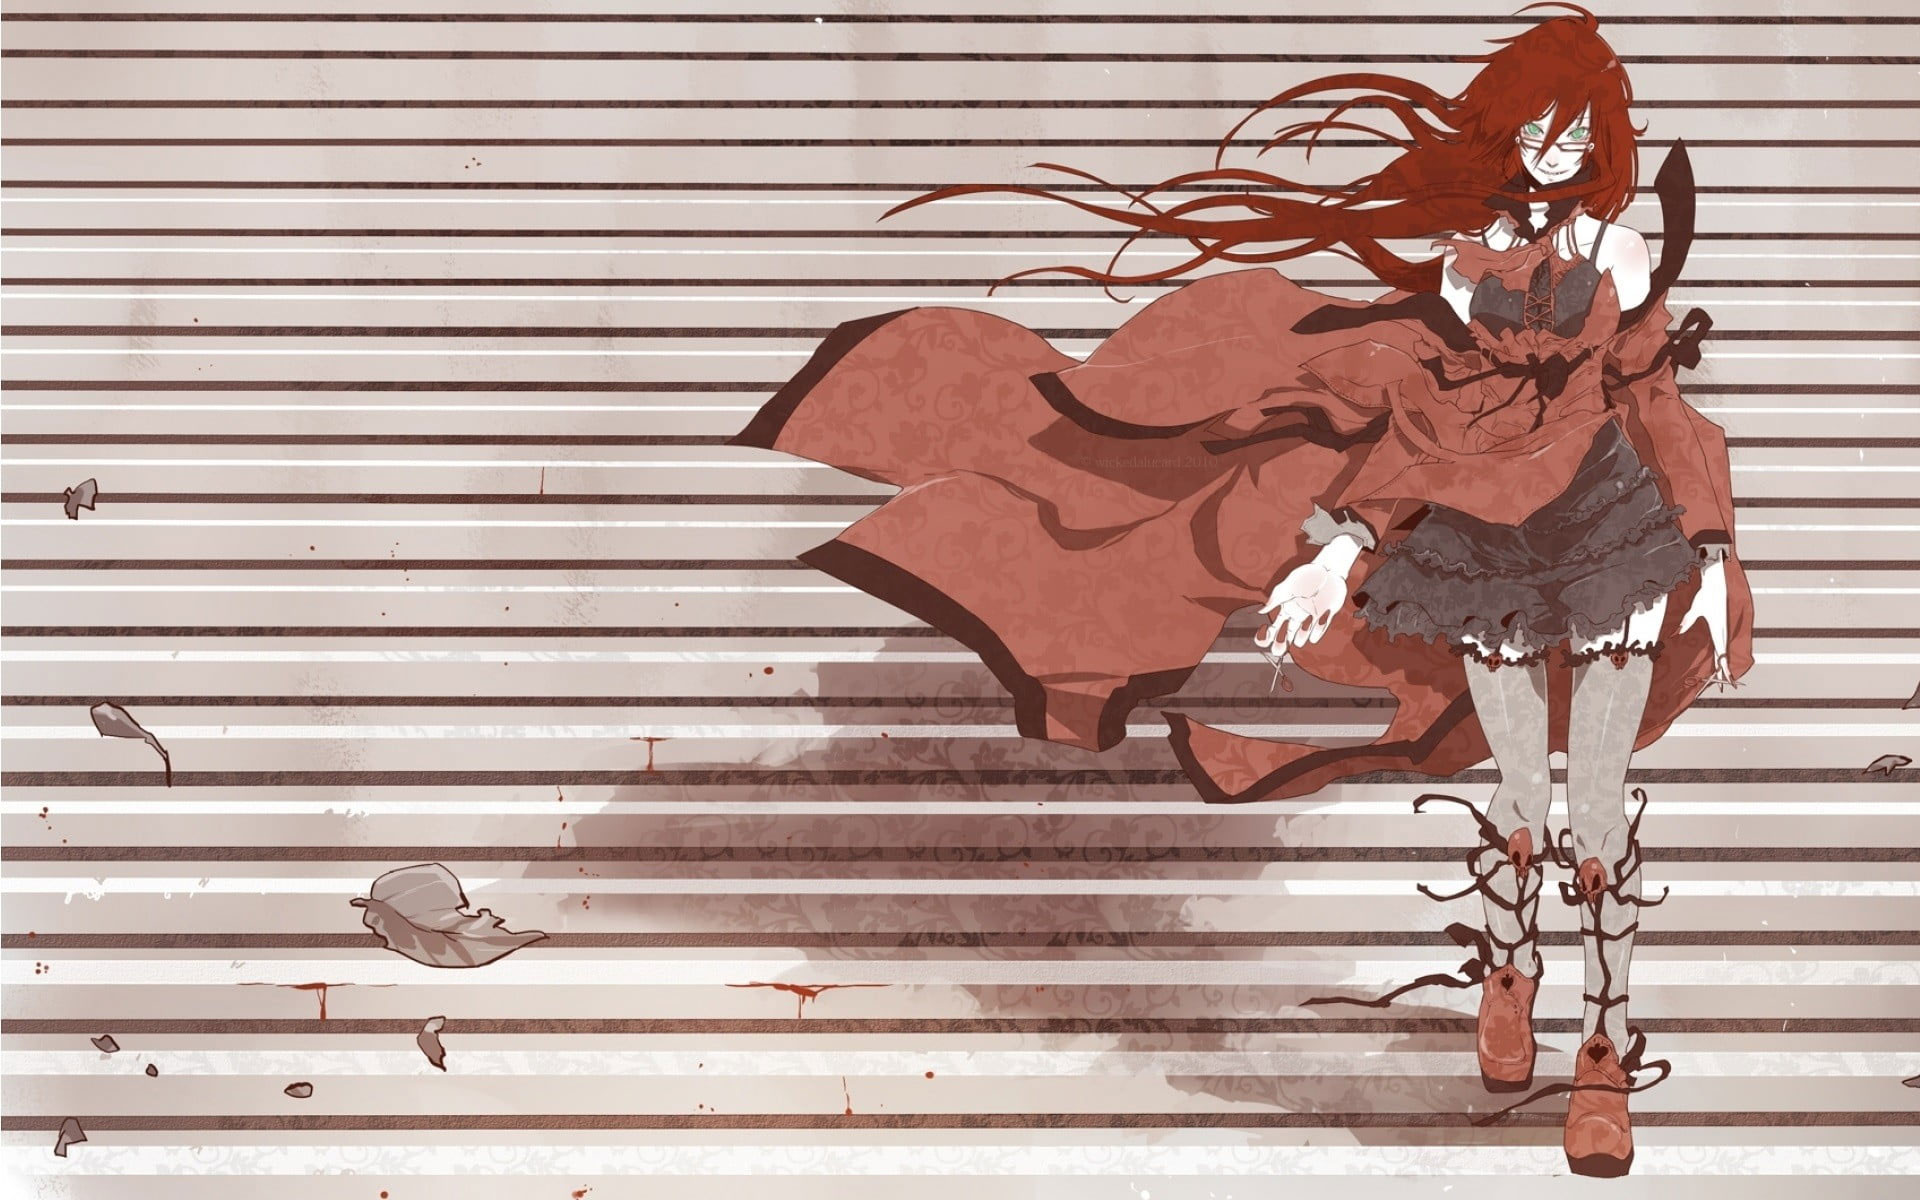 Black Butler Wallpaper Female Anime Character With Red Hair